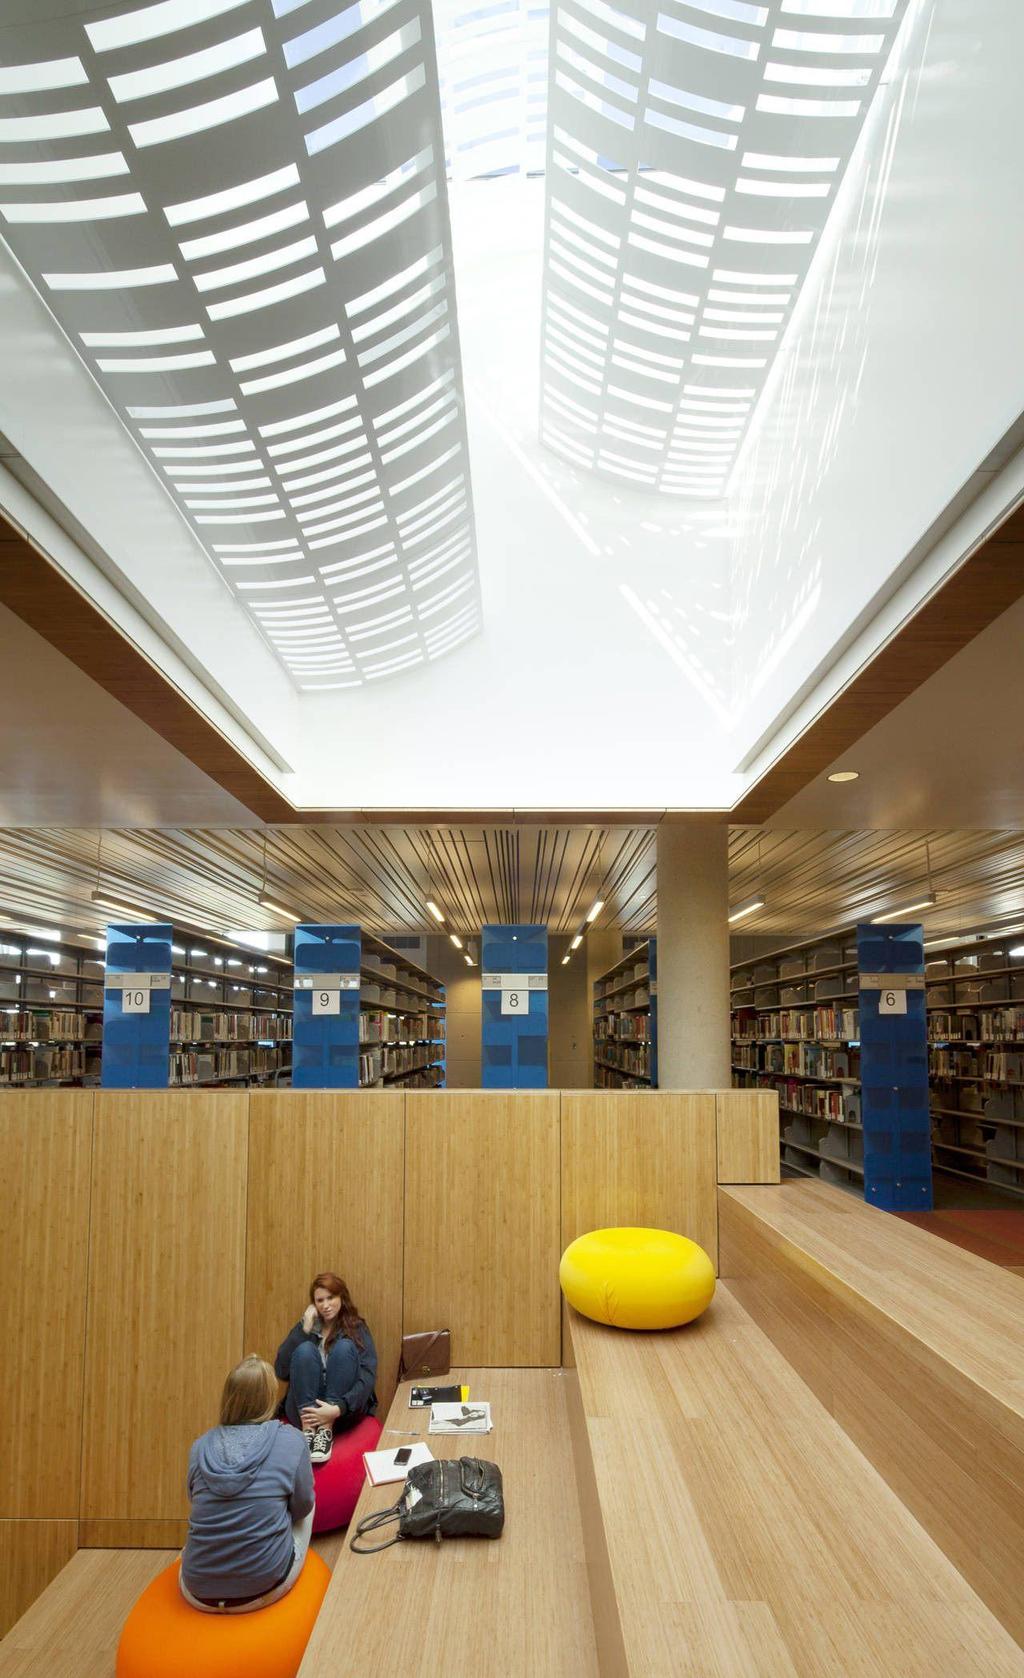 Once inside, there is a natural organization to the various library sections created by the layering of quiet, collaborative, social and private zones of the floor